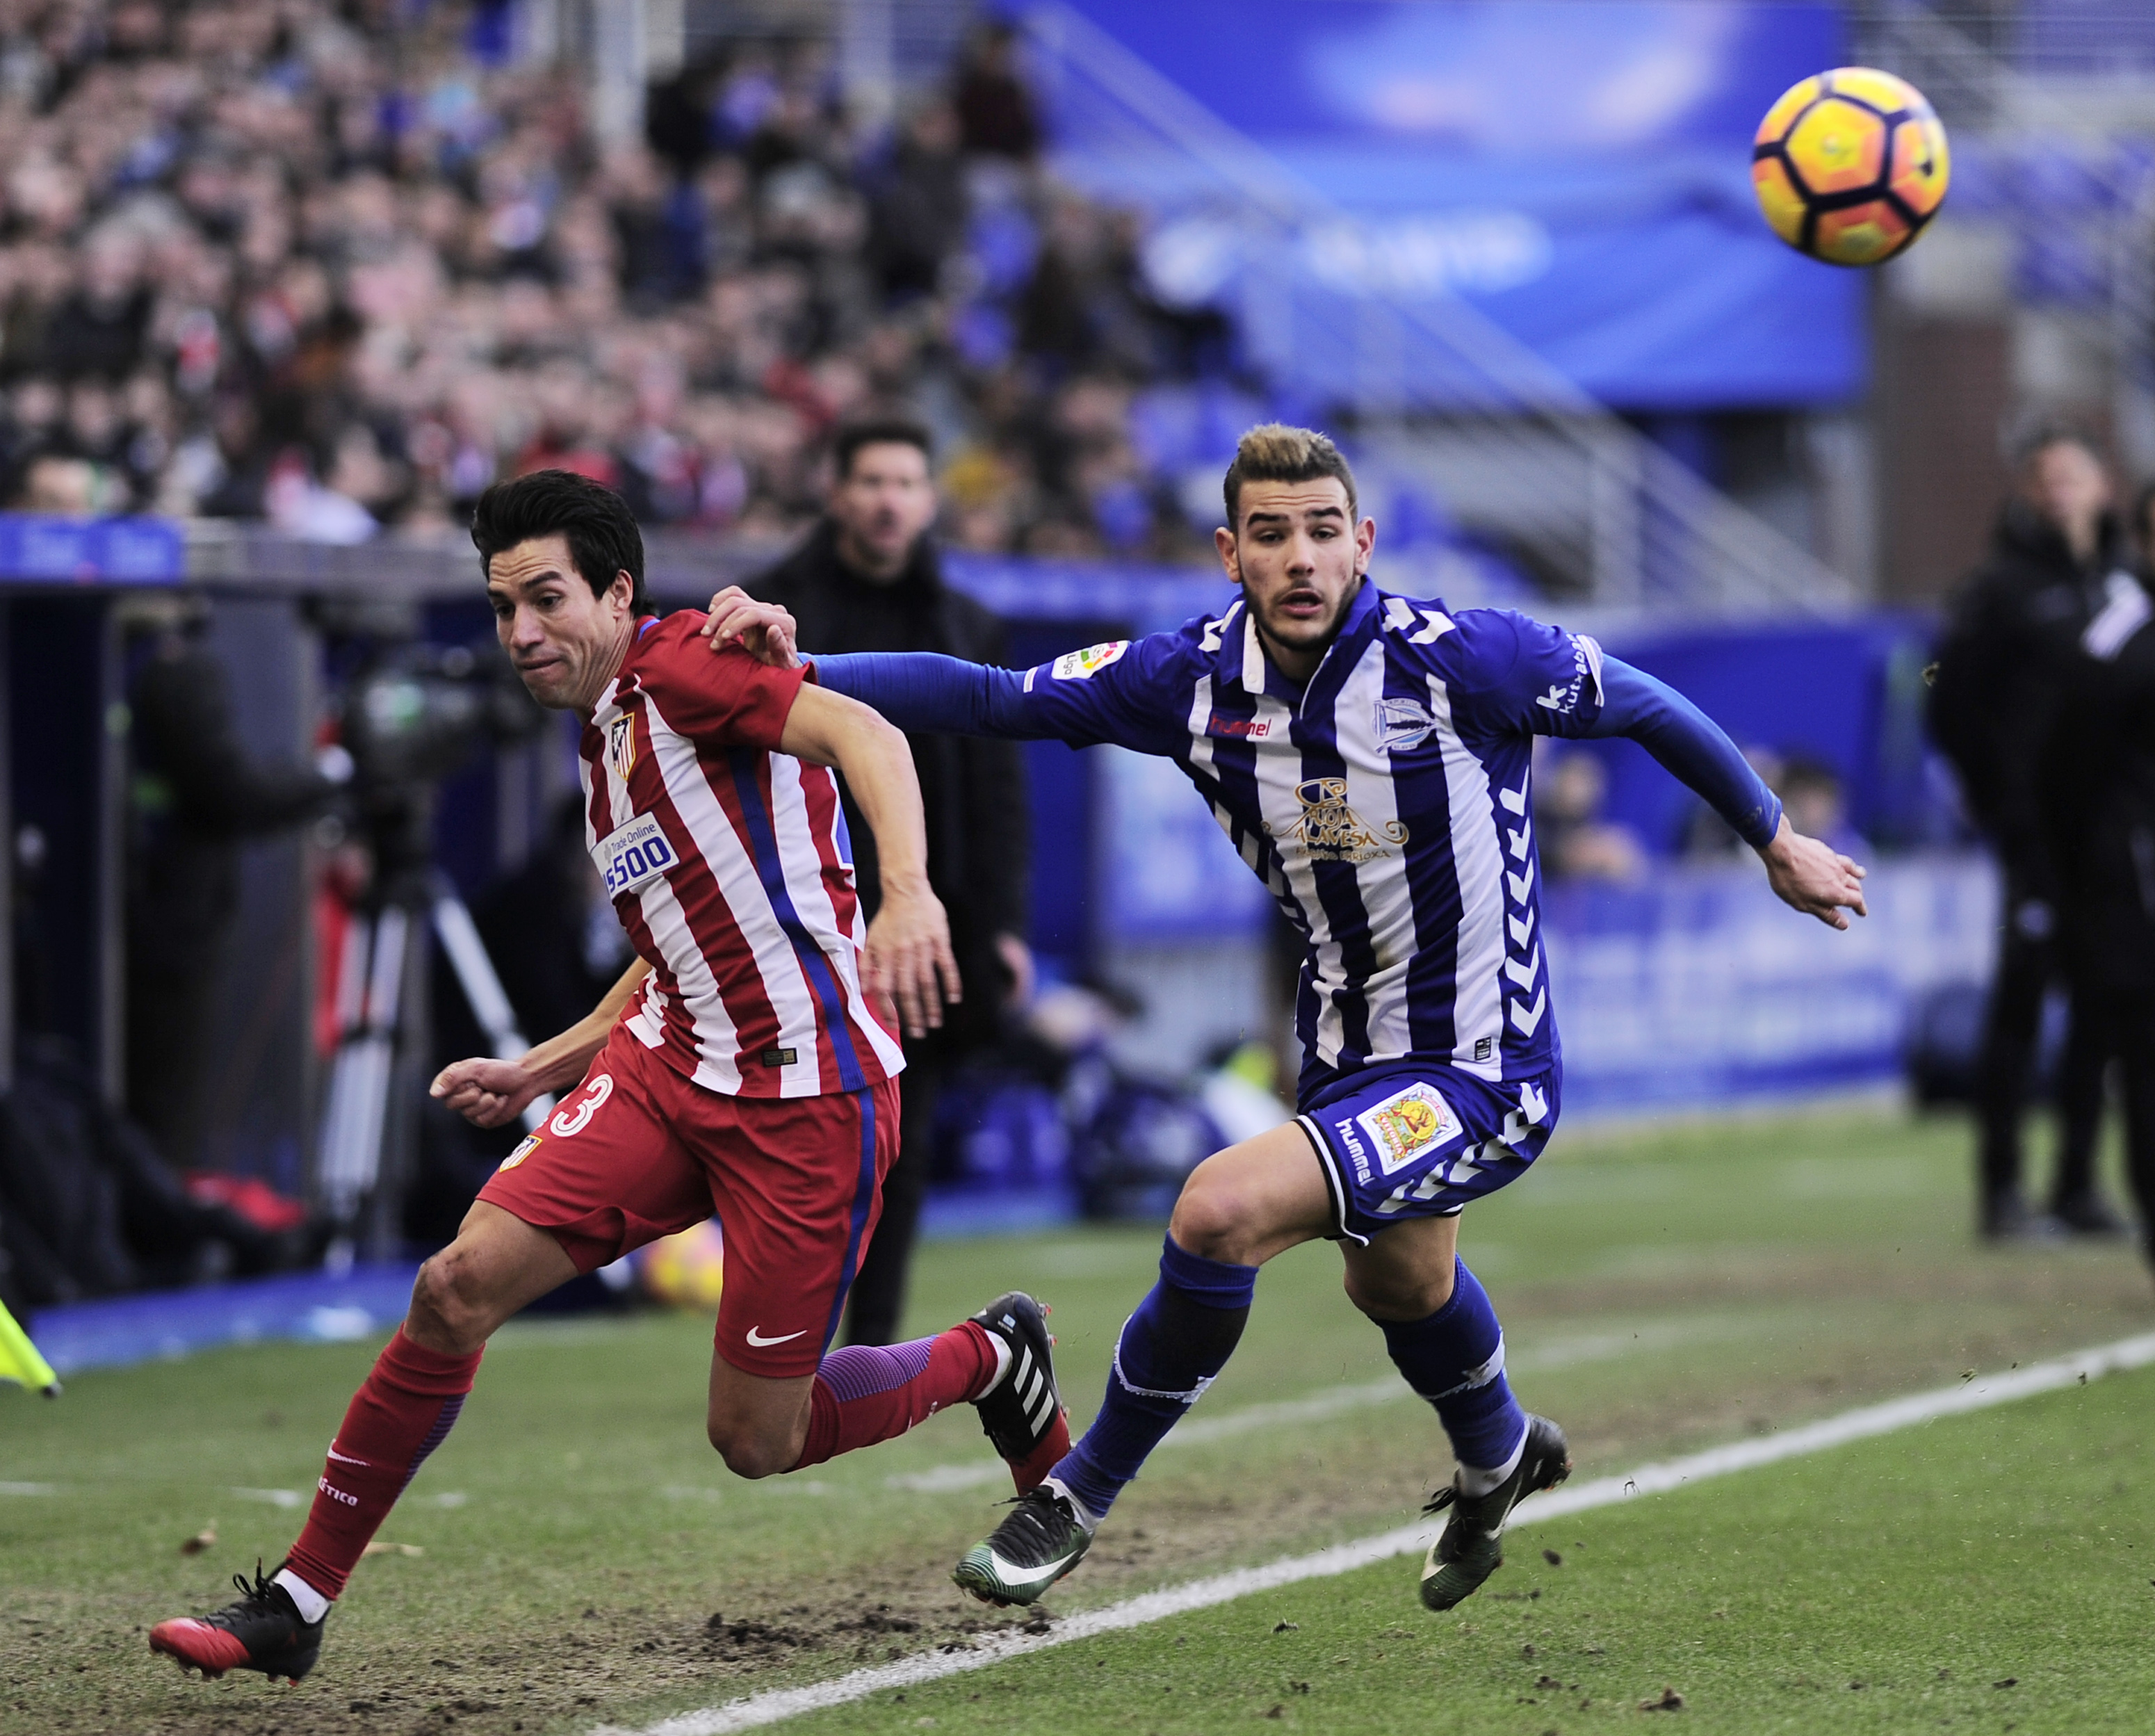 Atletico Madrid's Argentinian midfielder Nicolas Gaitan (L) vies with Deportivo Alaves' French defender Theo Hernandez (R) during the Spanish league football match Club Atletico de Madrid vs Deportivo Alaves at the Mendizorroza stadium in Vitoria on January 28, 2017.
  / AFP PHOTO / ANDER GILLENEA        (Photo credit should read ANDER GILLENEA/AFP/Getty Images)